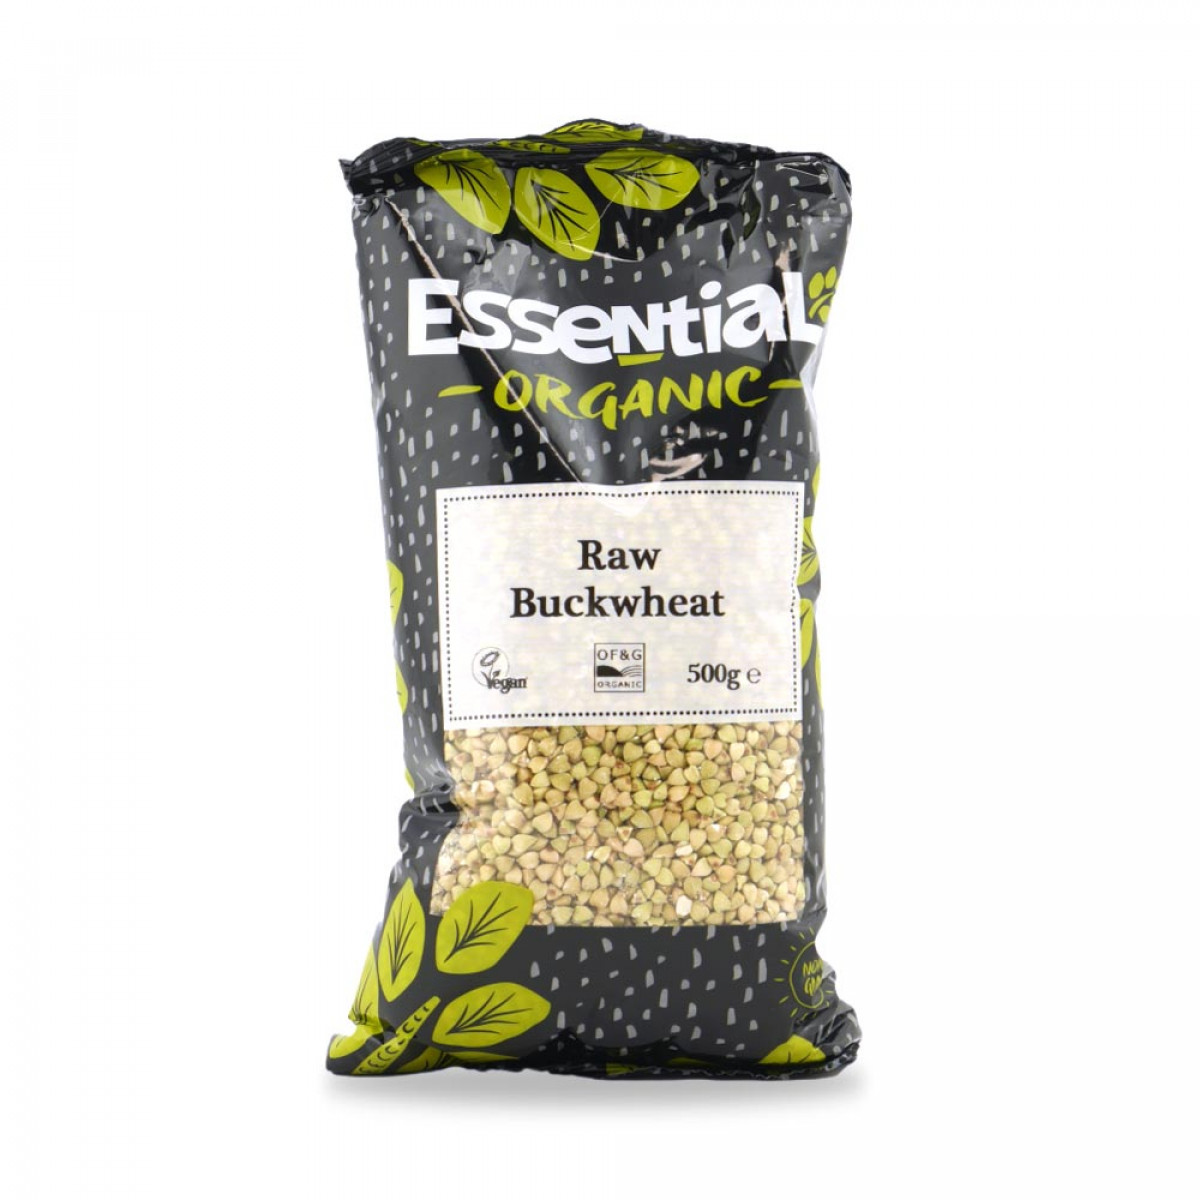 Product picture for Buckwheat, Raw